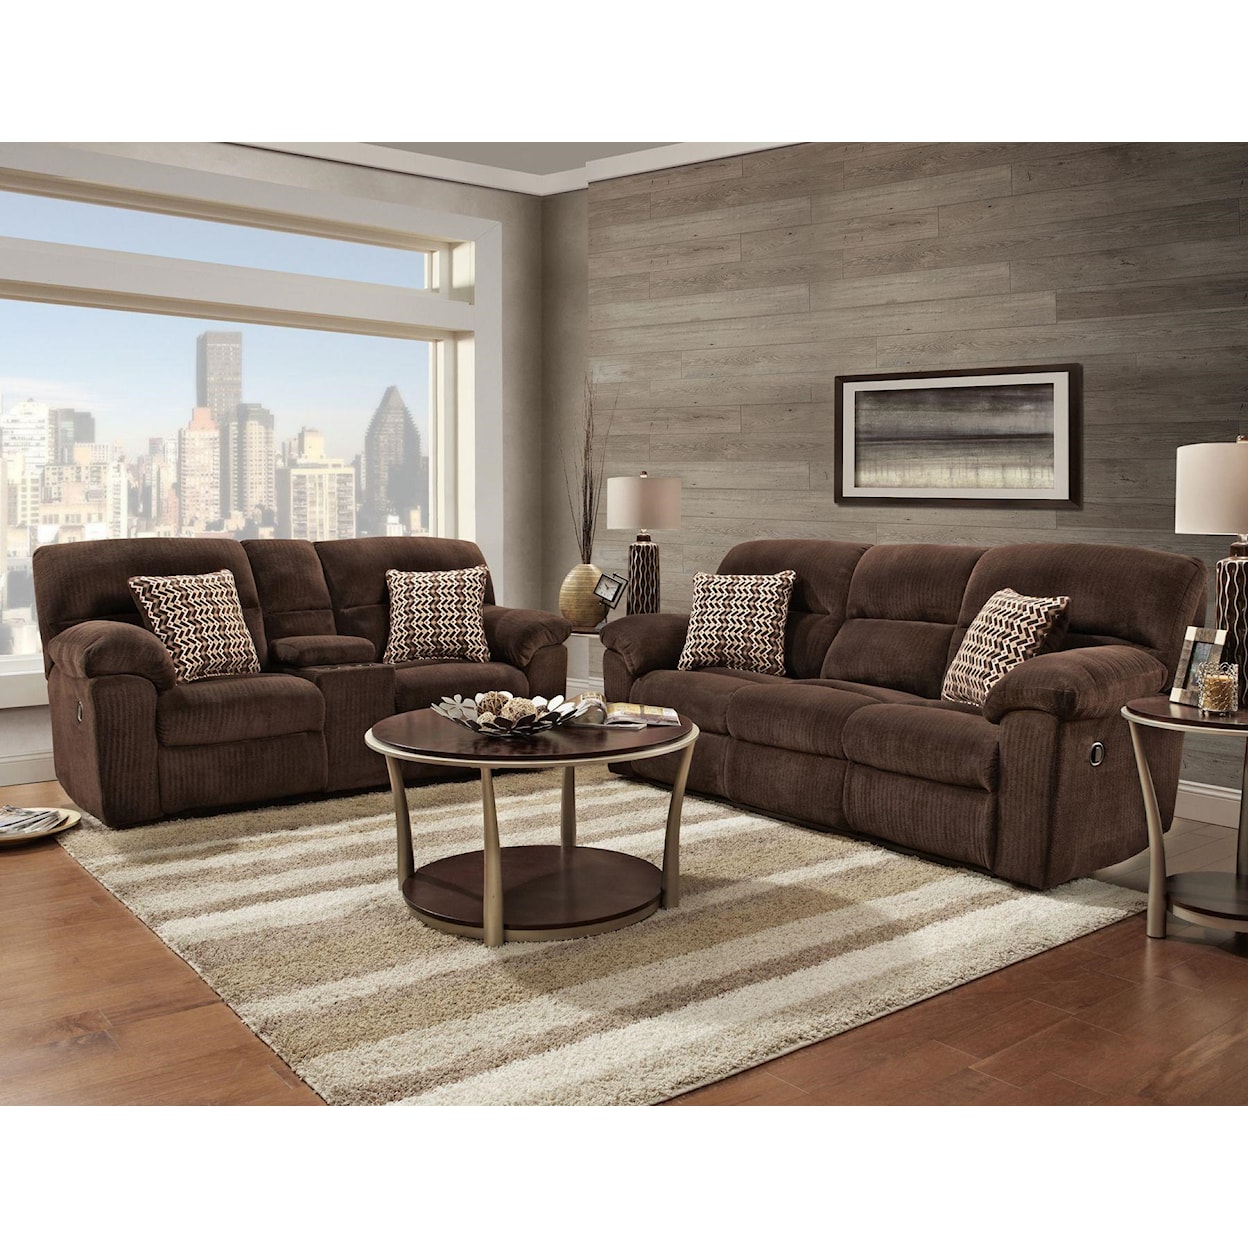 Affordable Furniture Afford MFG All 1420 Reclining Console Loveseat